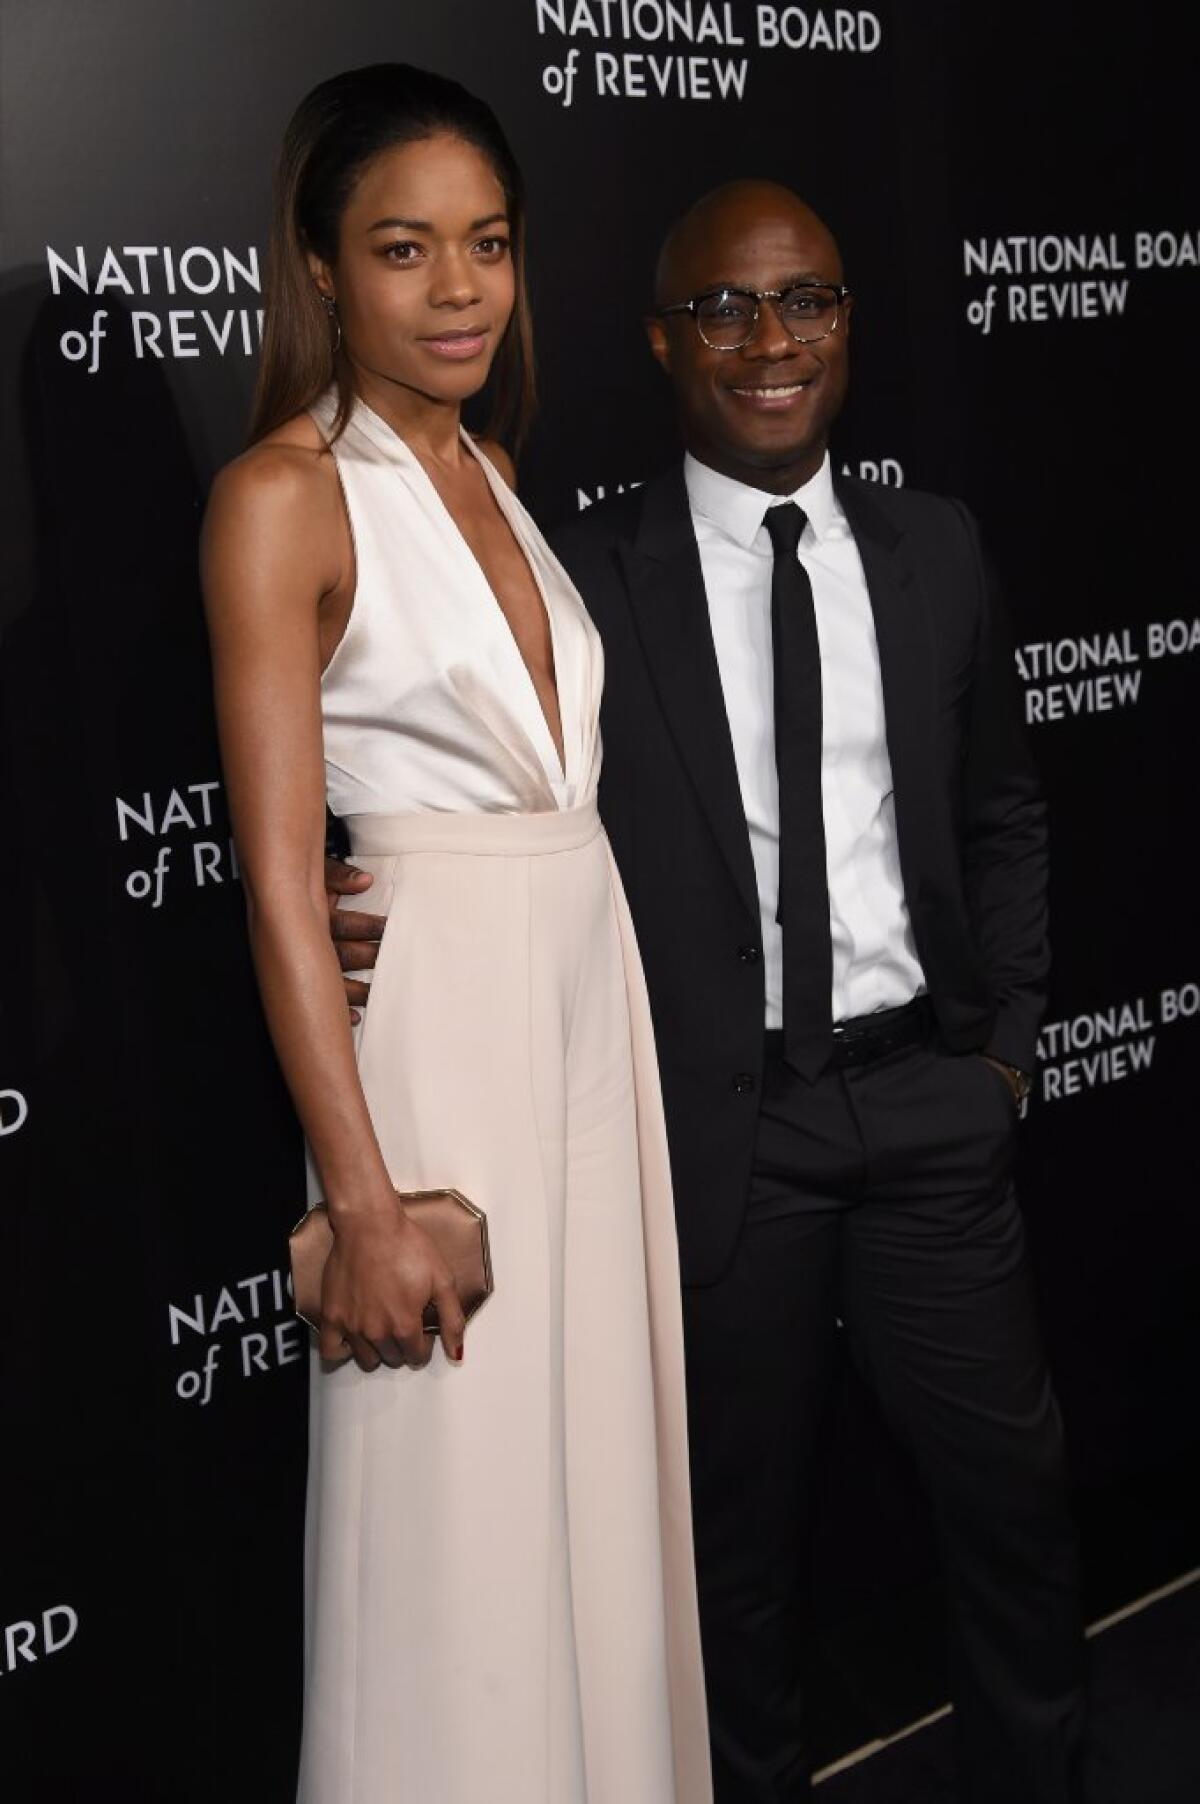 "Moonlight" awardee Naomie Harris and screenwriter and director Barry Jenkins attend the 2016 National Board of Review Gala at Cipriani 42nd Street on January 4, 2017 in New York City.